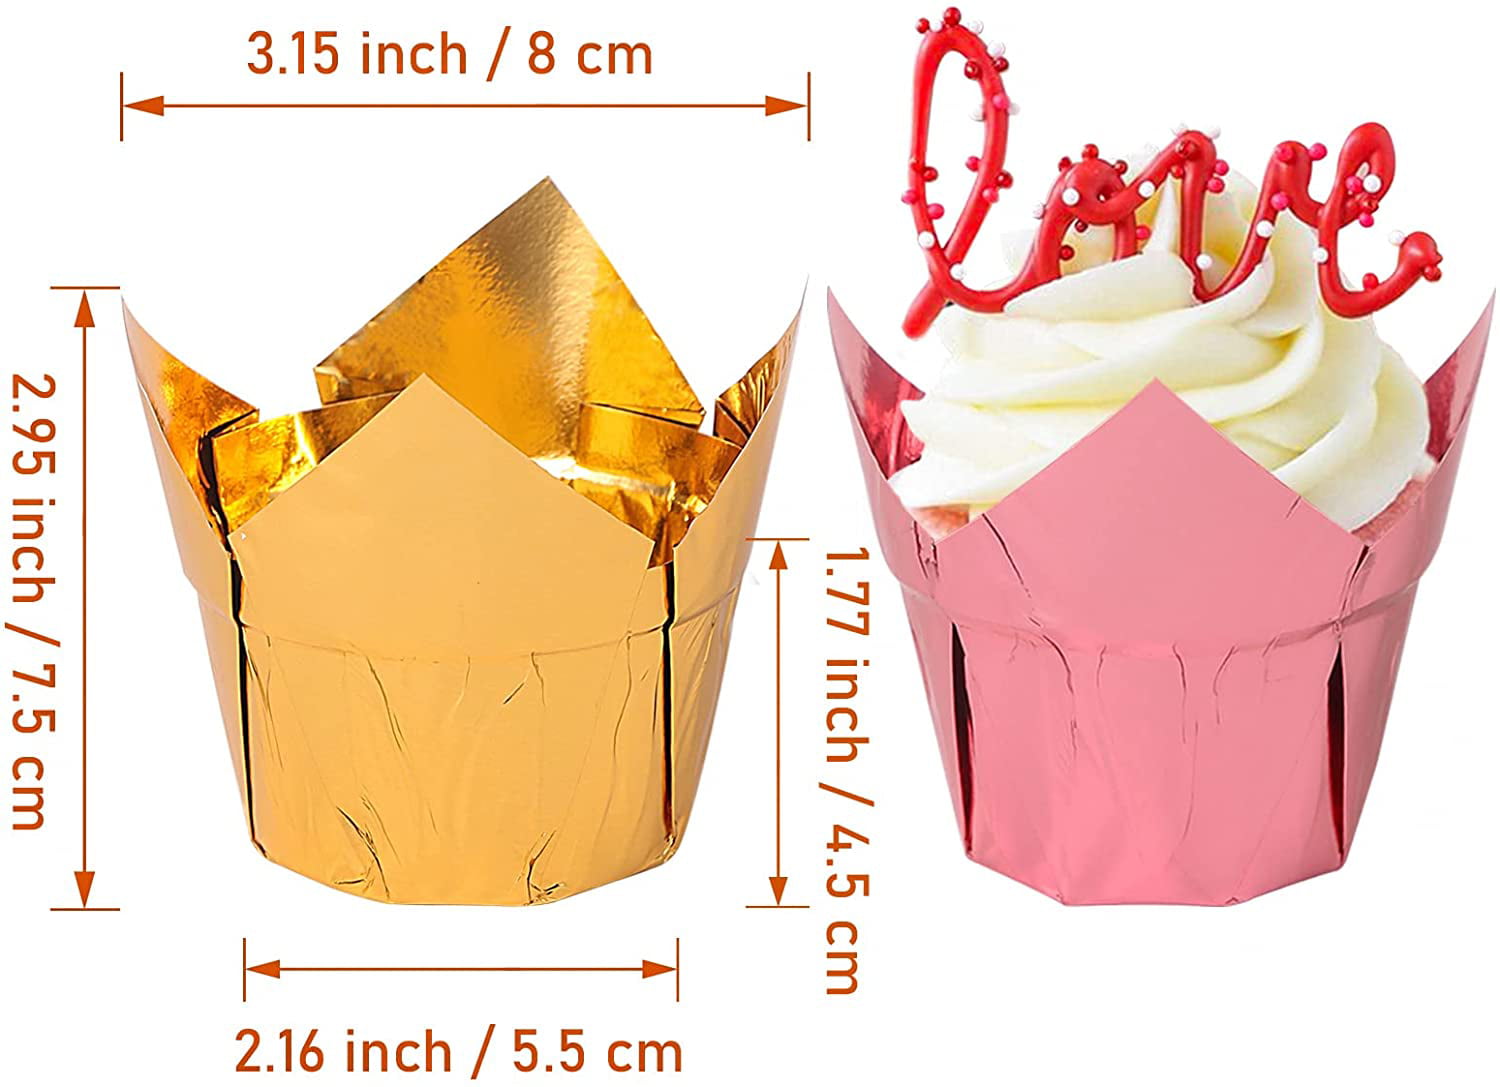 Katbite Tulip Cupcake Liners 200pcs, Muffin Liners Baking Cups, Cupcake Wrapper for Party, Wedding, Birthday, Colourful Cupcake Liners Standard Size